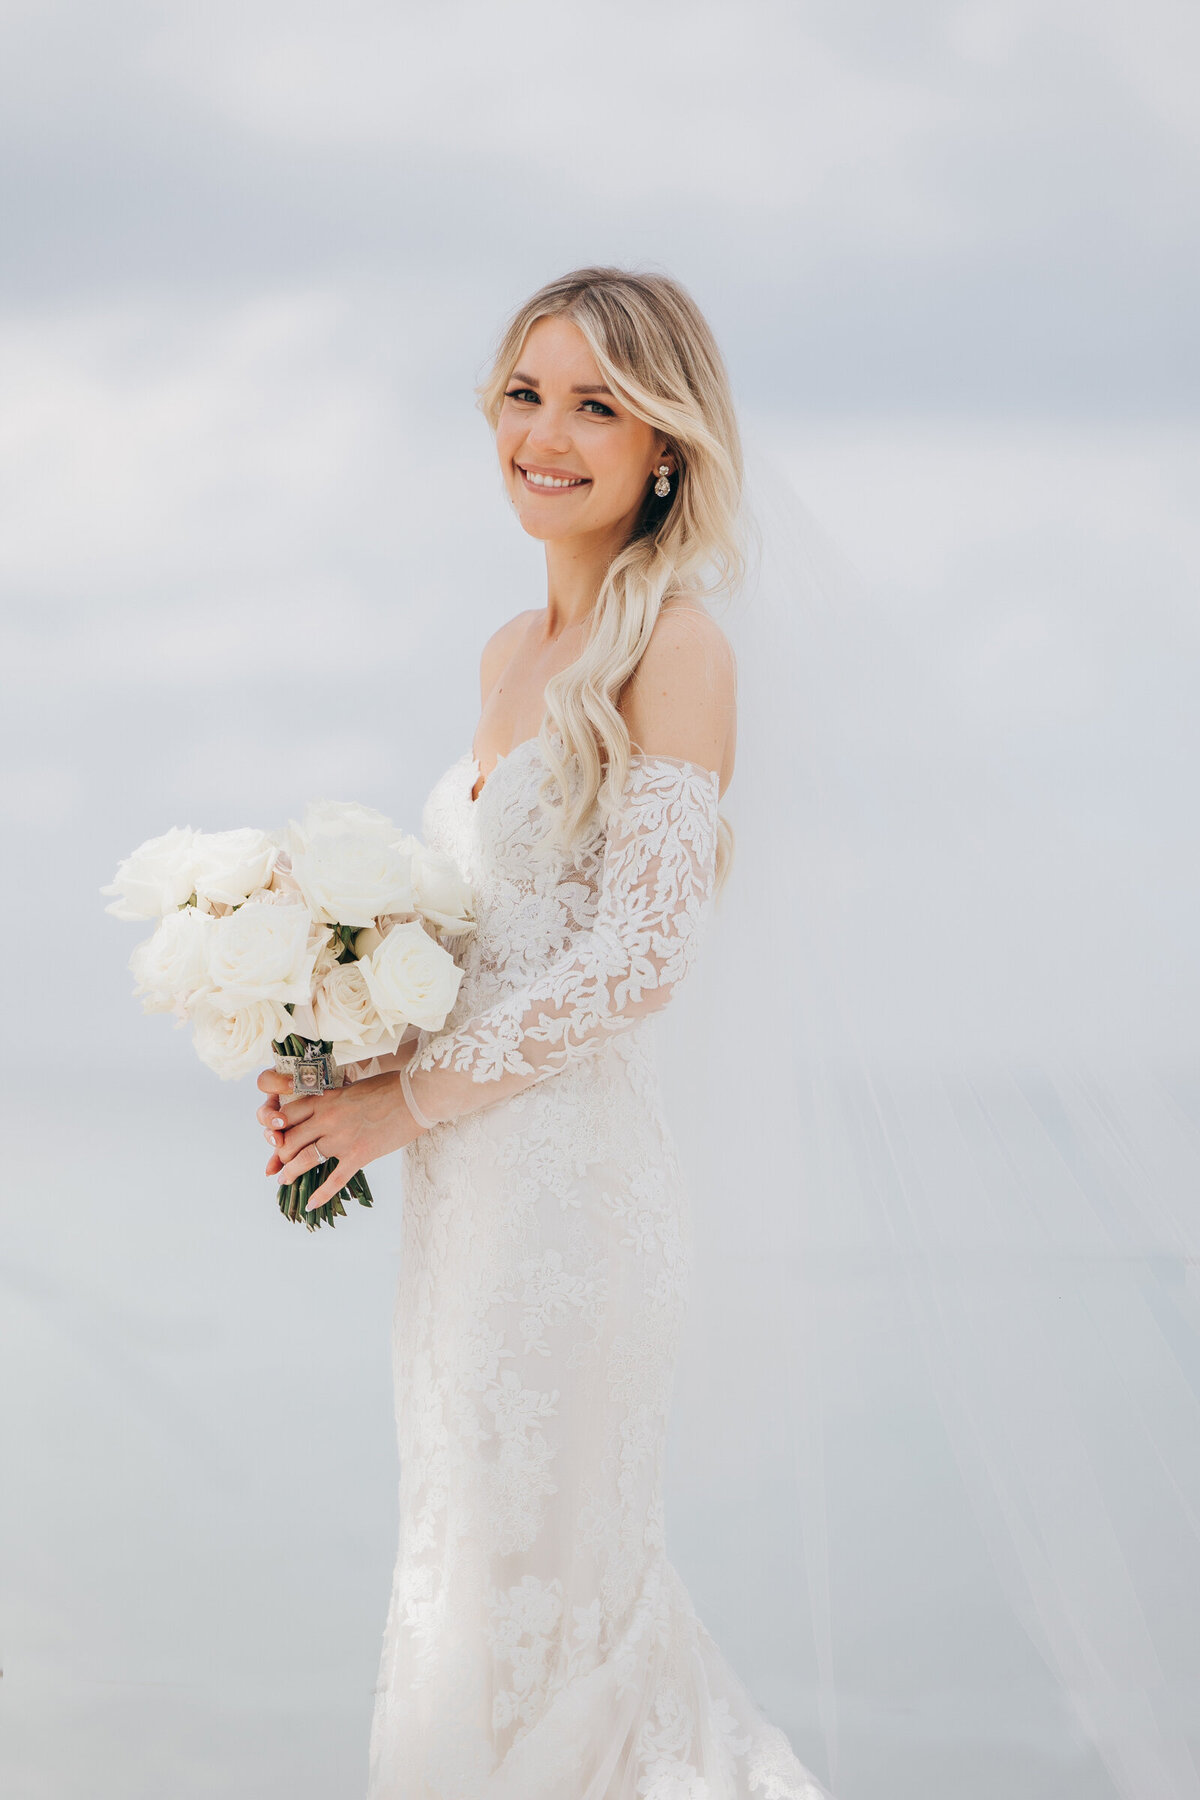 Elegant bridal portraits of bride wearing luxurious lace dress while holding chic white roses